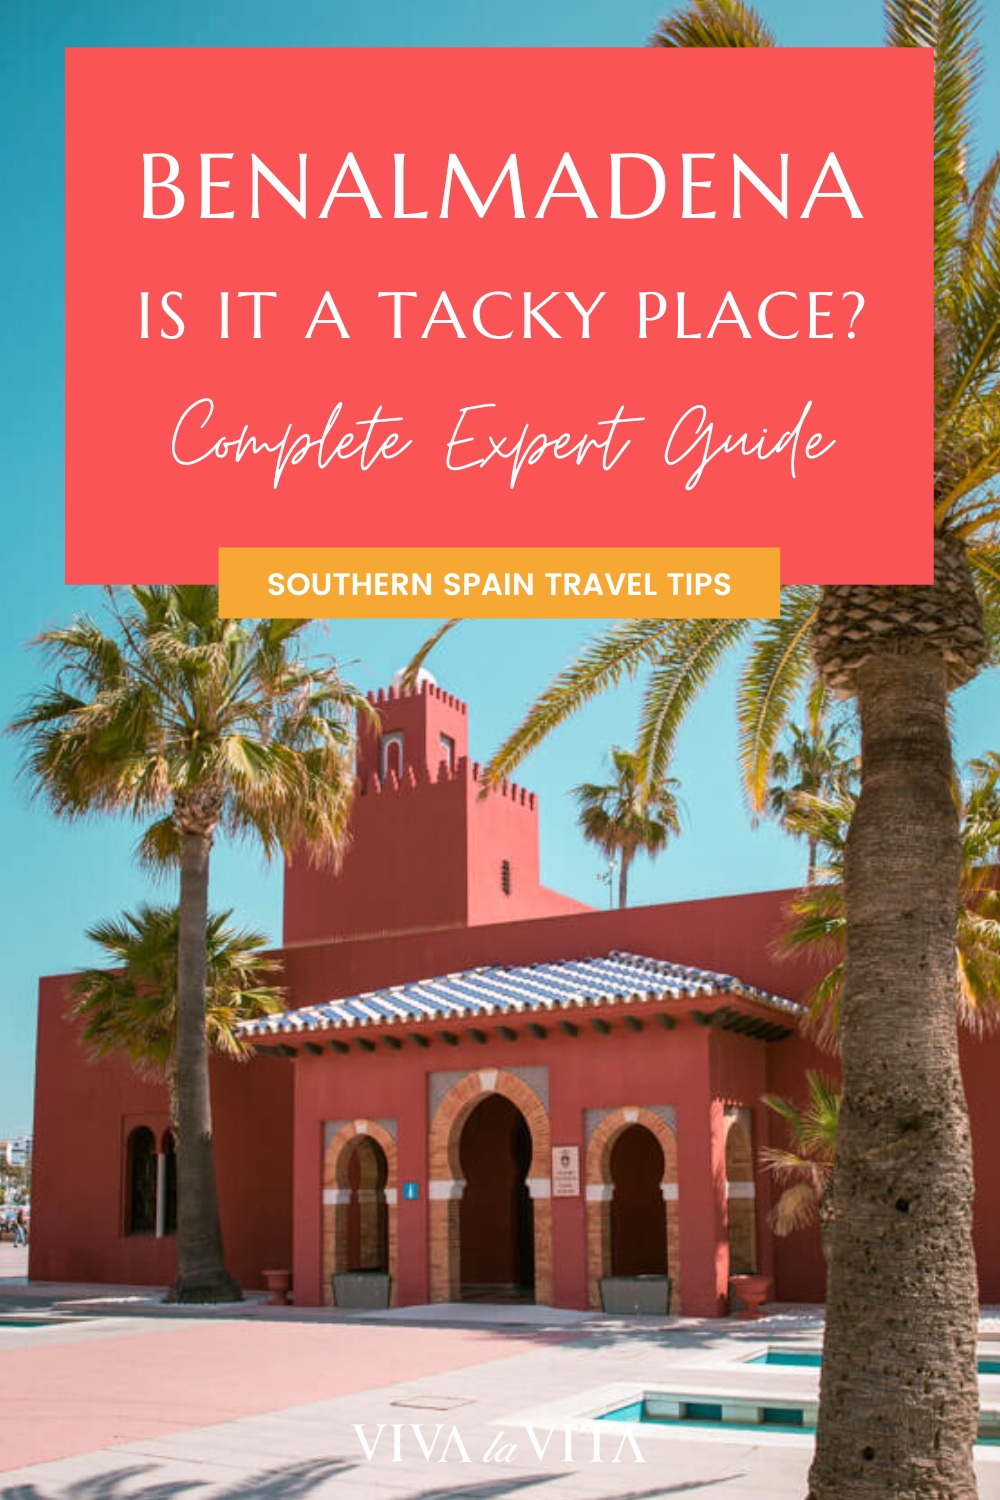 pinterest image showing the castillo bil bil in benalmadena, with headline that reads: benalmadena is it a tacky place, complete expert guide, southern spain travel tips